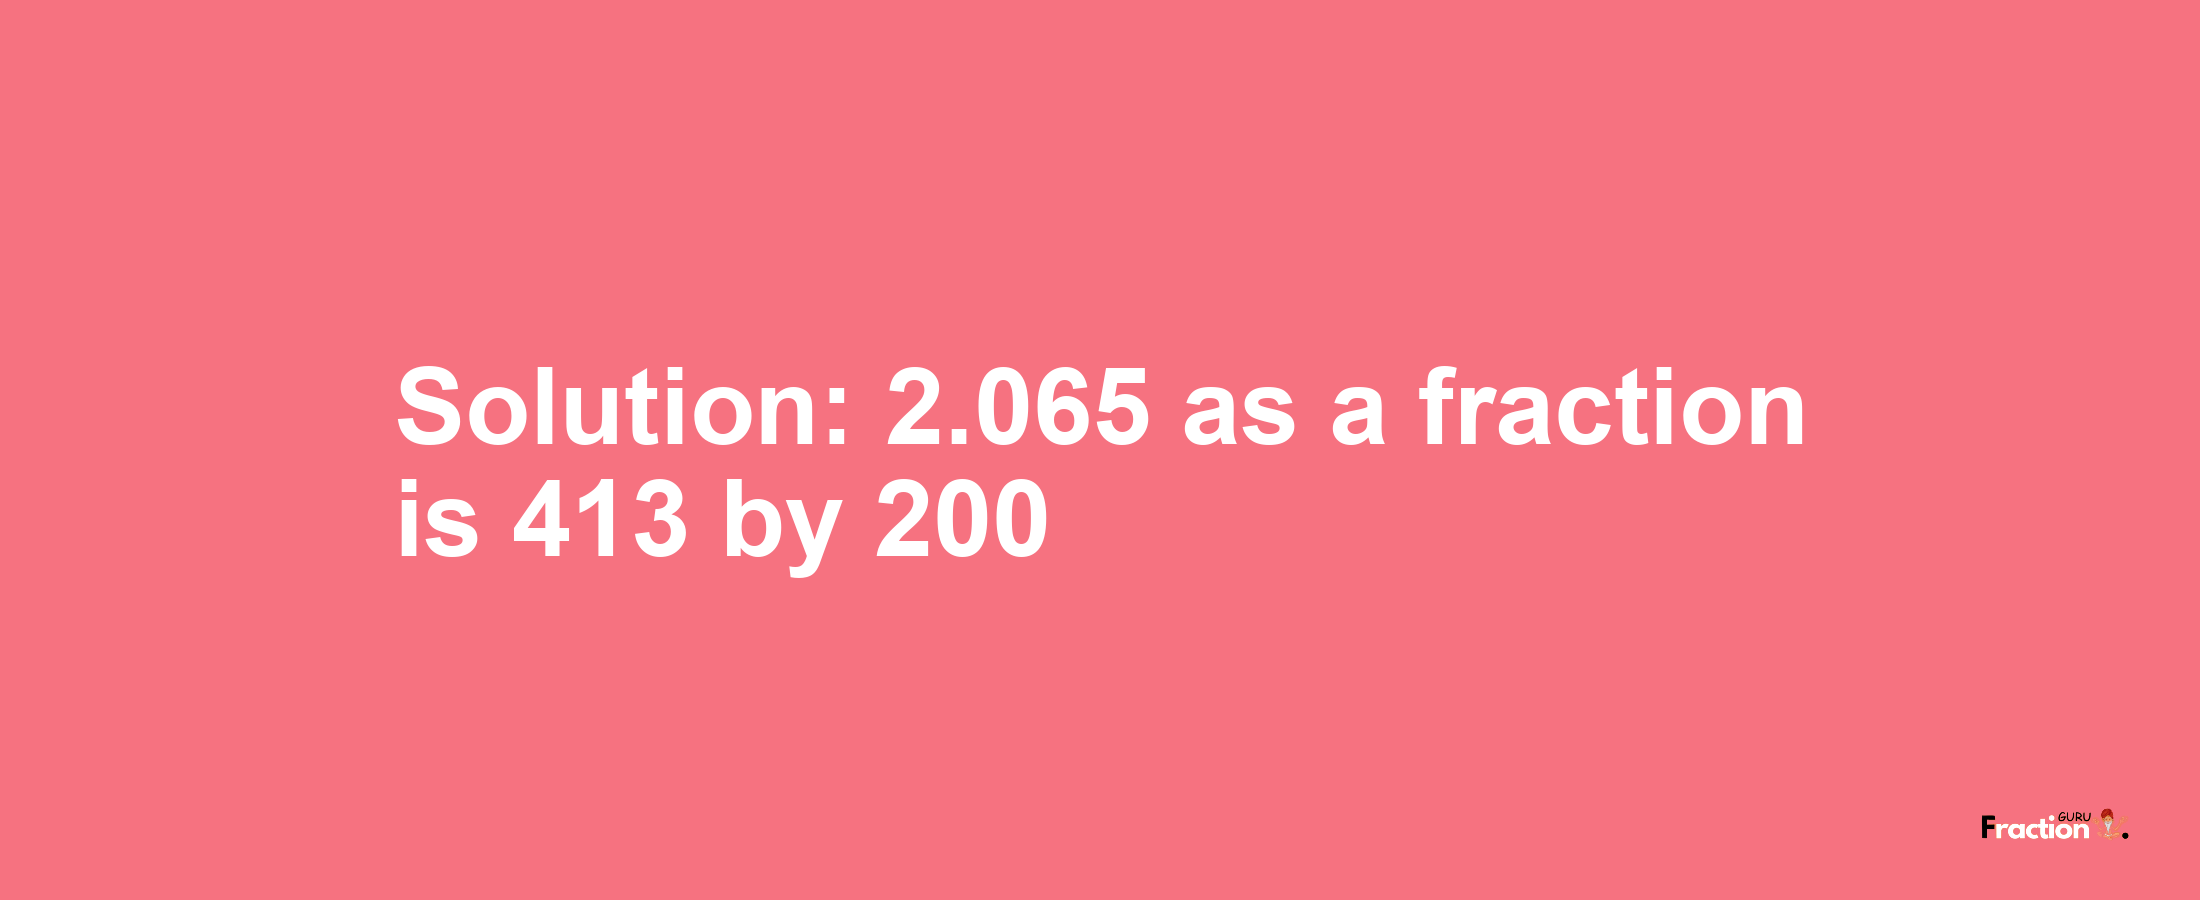 Solution:2.065 as a fraction is 413/200